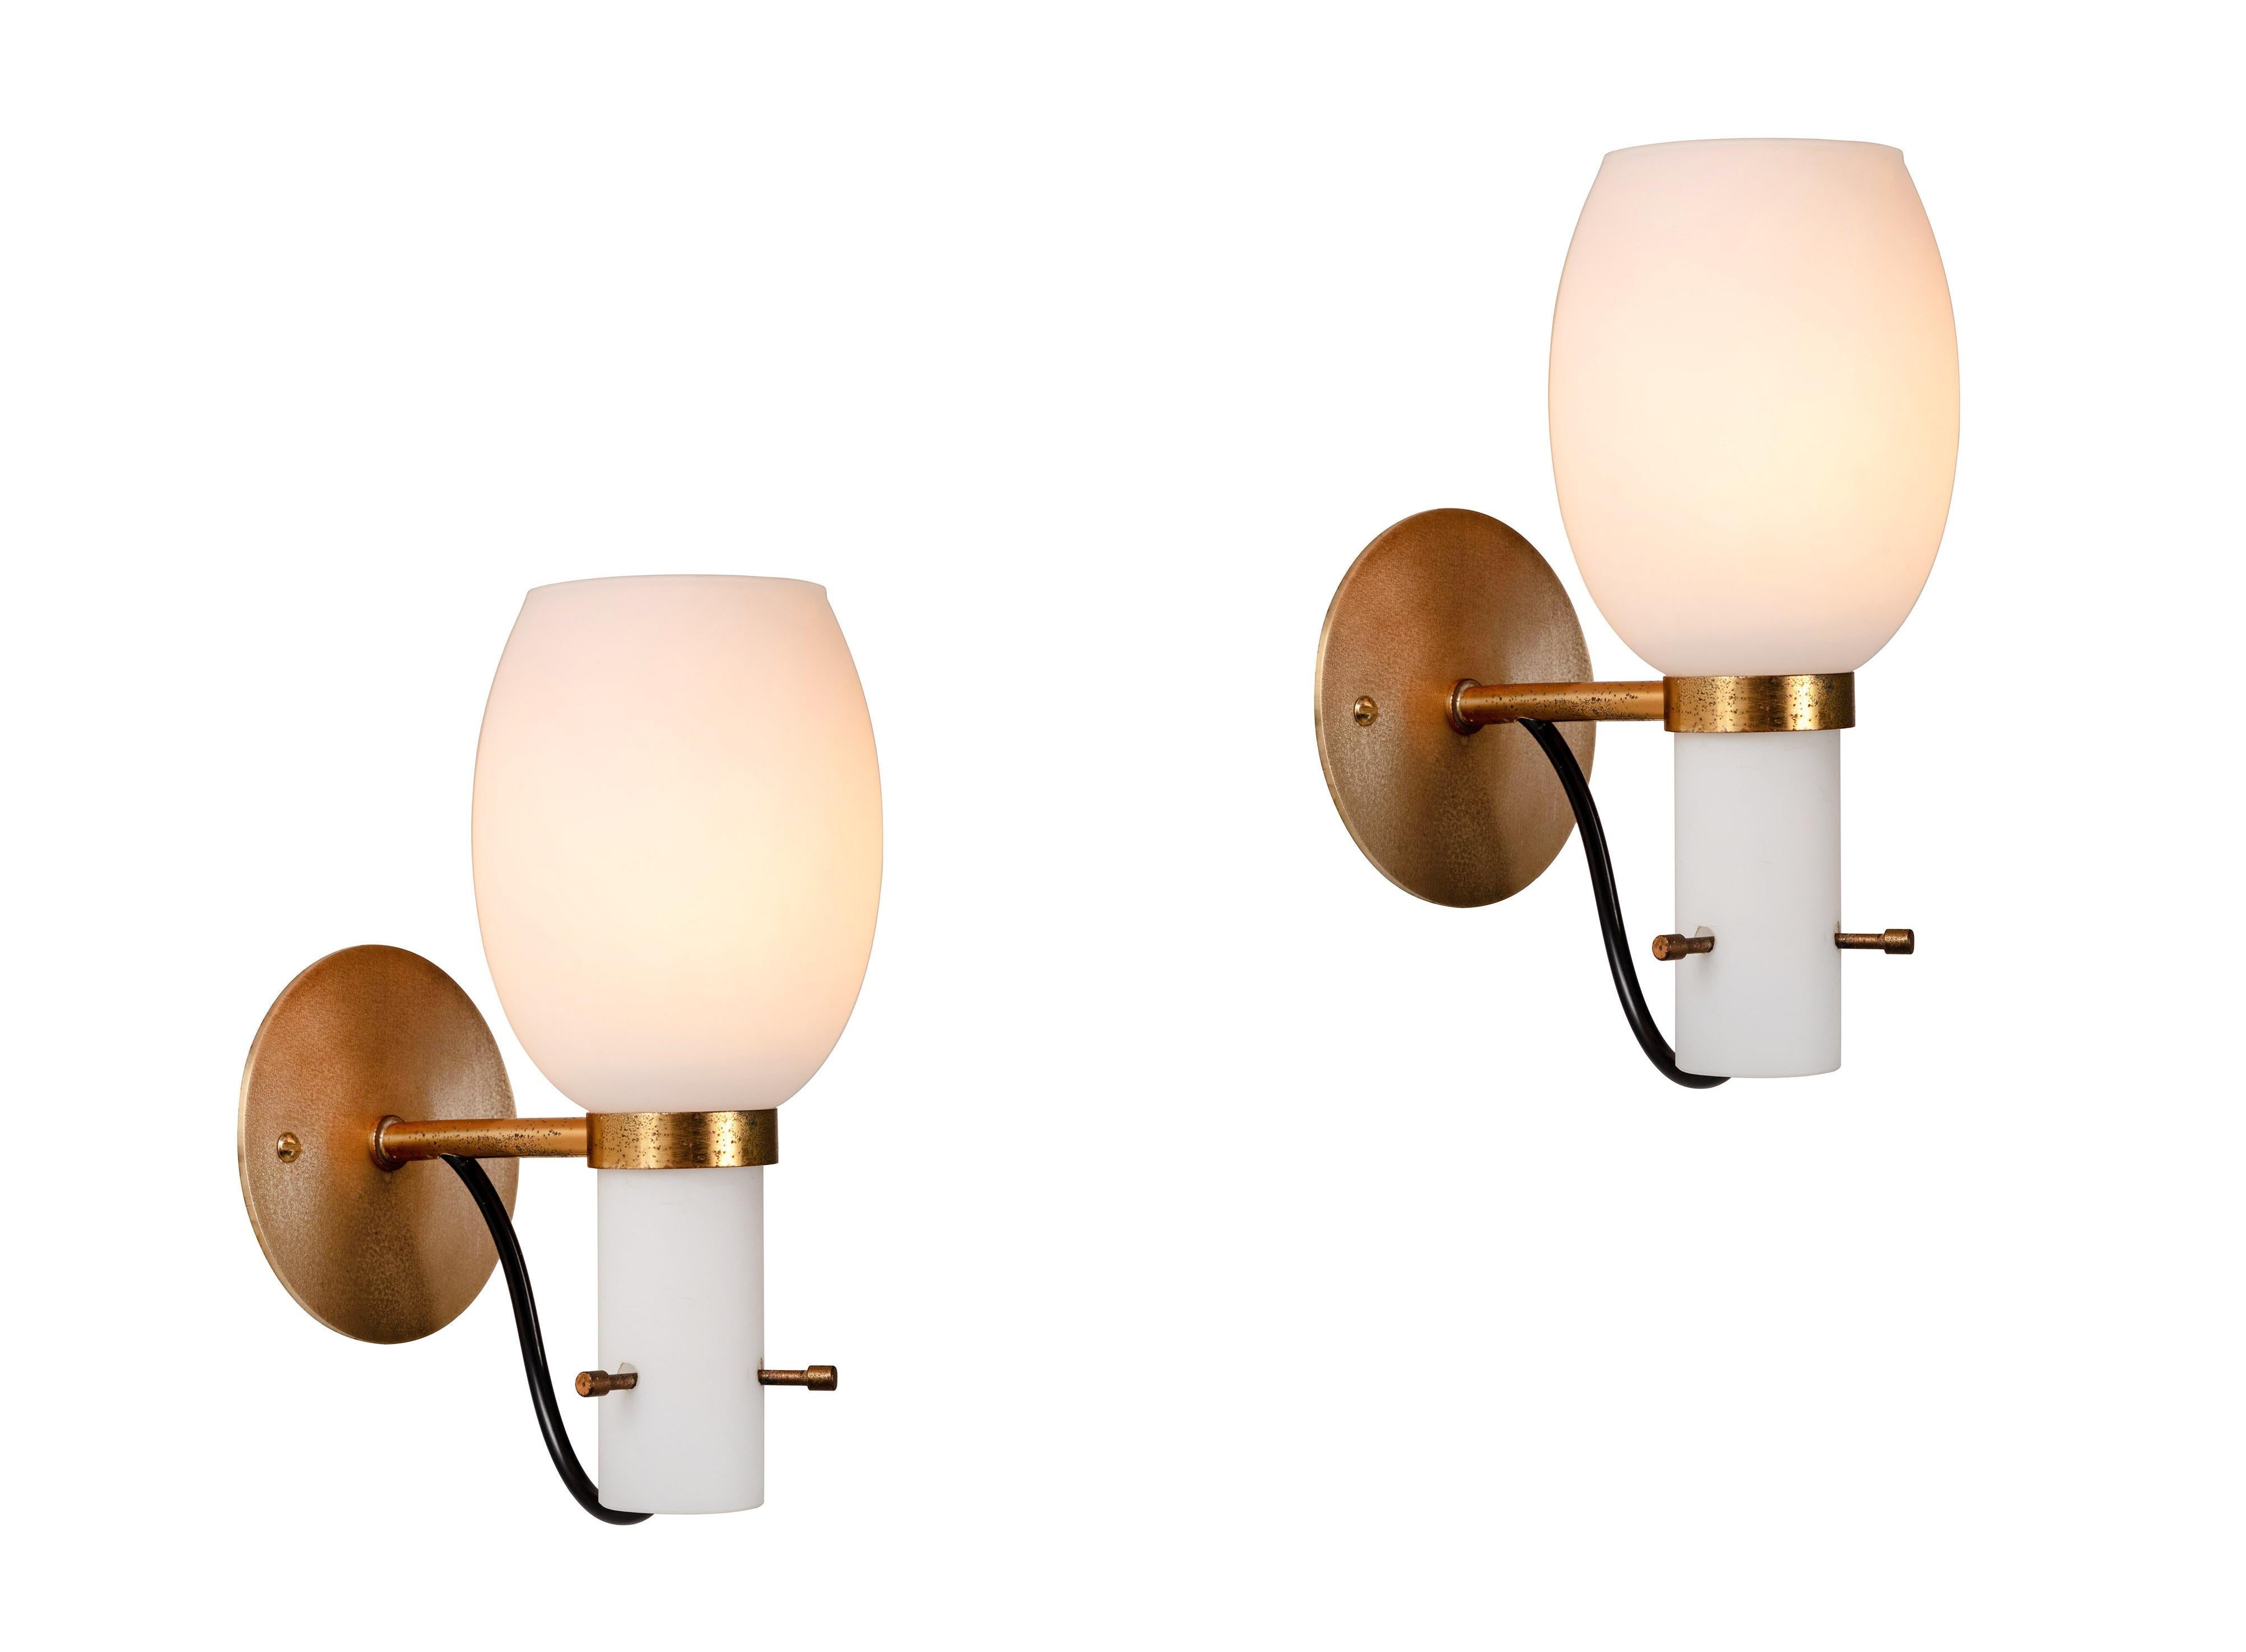 1950s Italian brass and glass sconces attributed to Stilnovo. Executed in patinated brass and sculptural opaline glass. Ingeniously held in place with 3 decorative and richly patinated brass screws. An elegant and refined lighting design reflecting